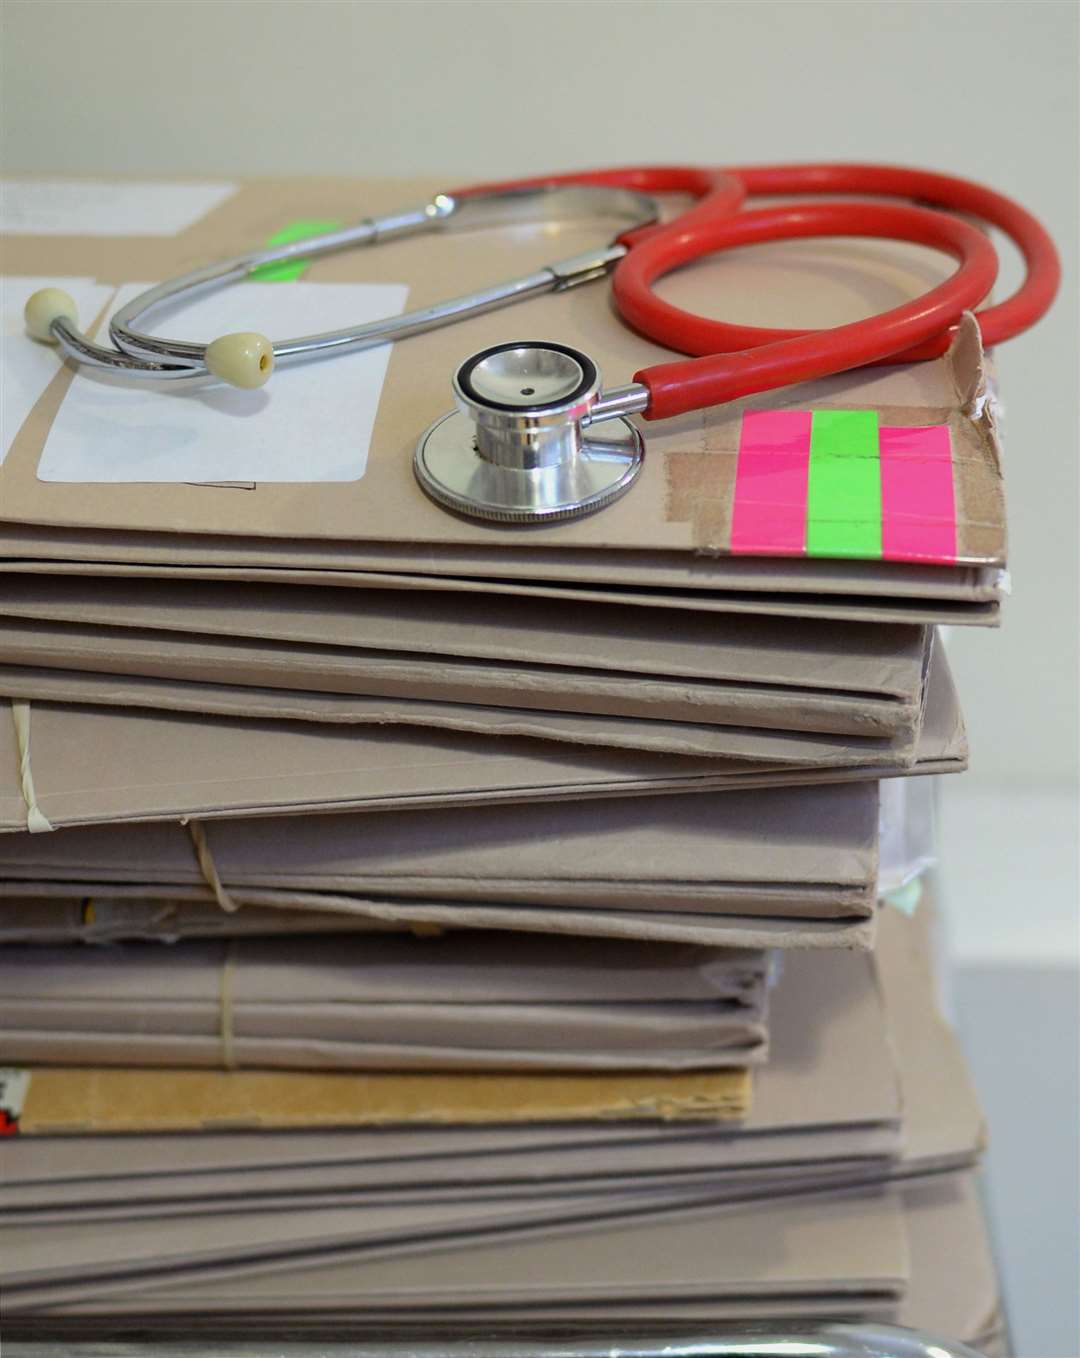 A stethoscope on top of patient’s files.